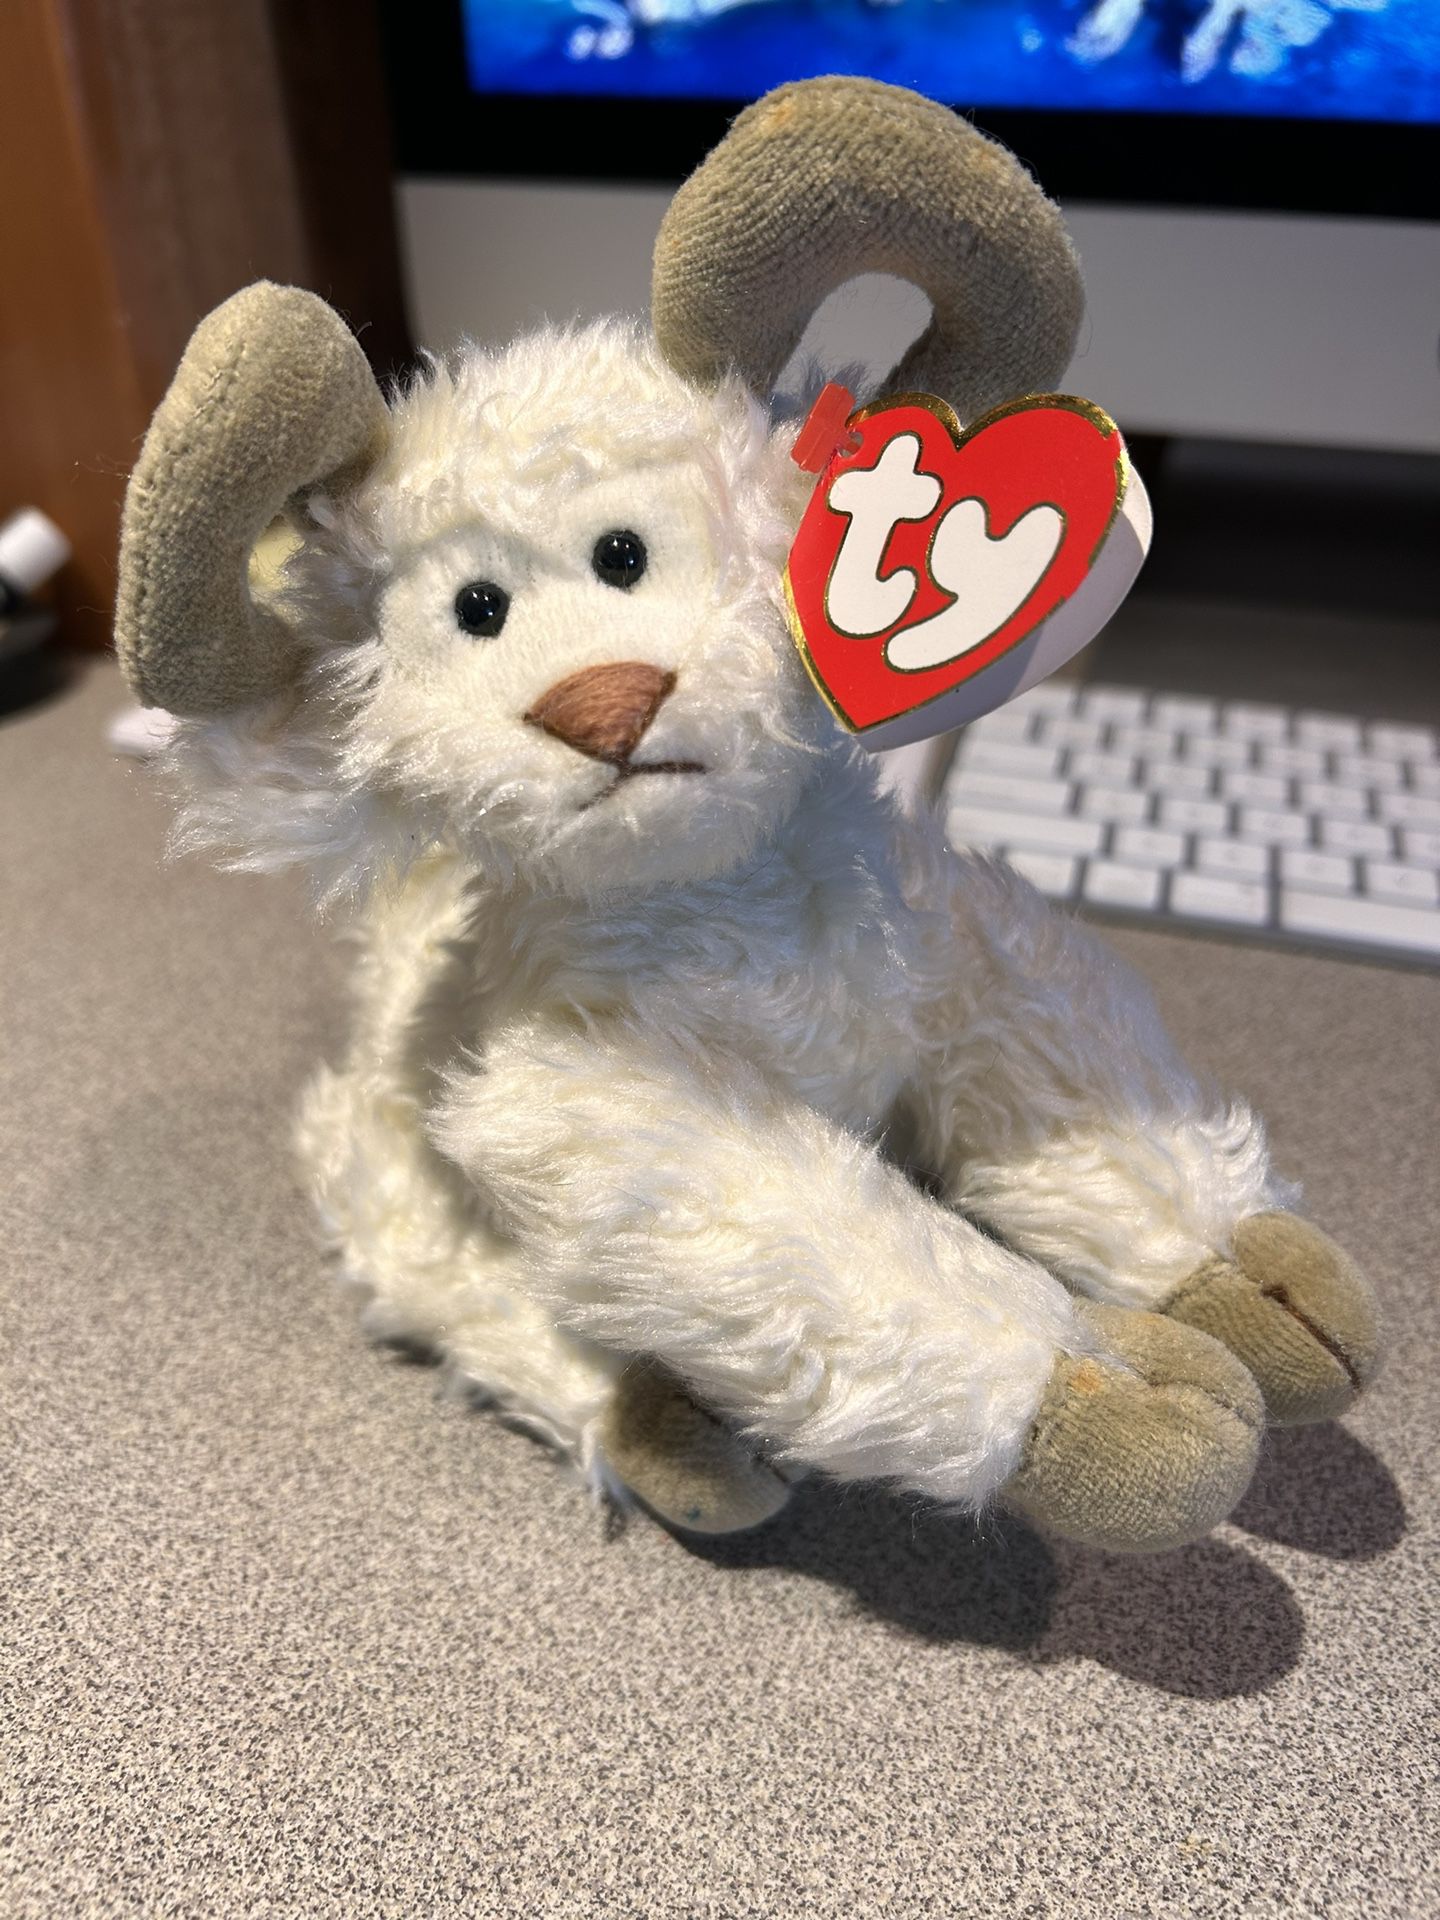 RARE RETIRED 1993 TY BEANIE BABY RAMSEY THE RAM WITH PVC PELLETS/ERRORS